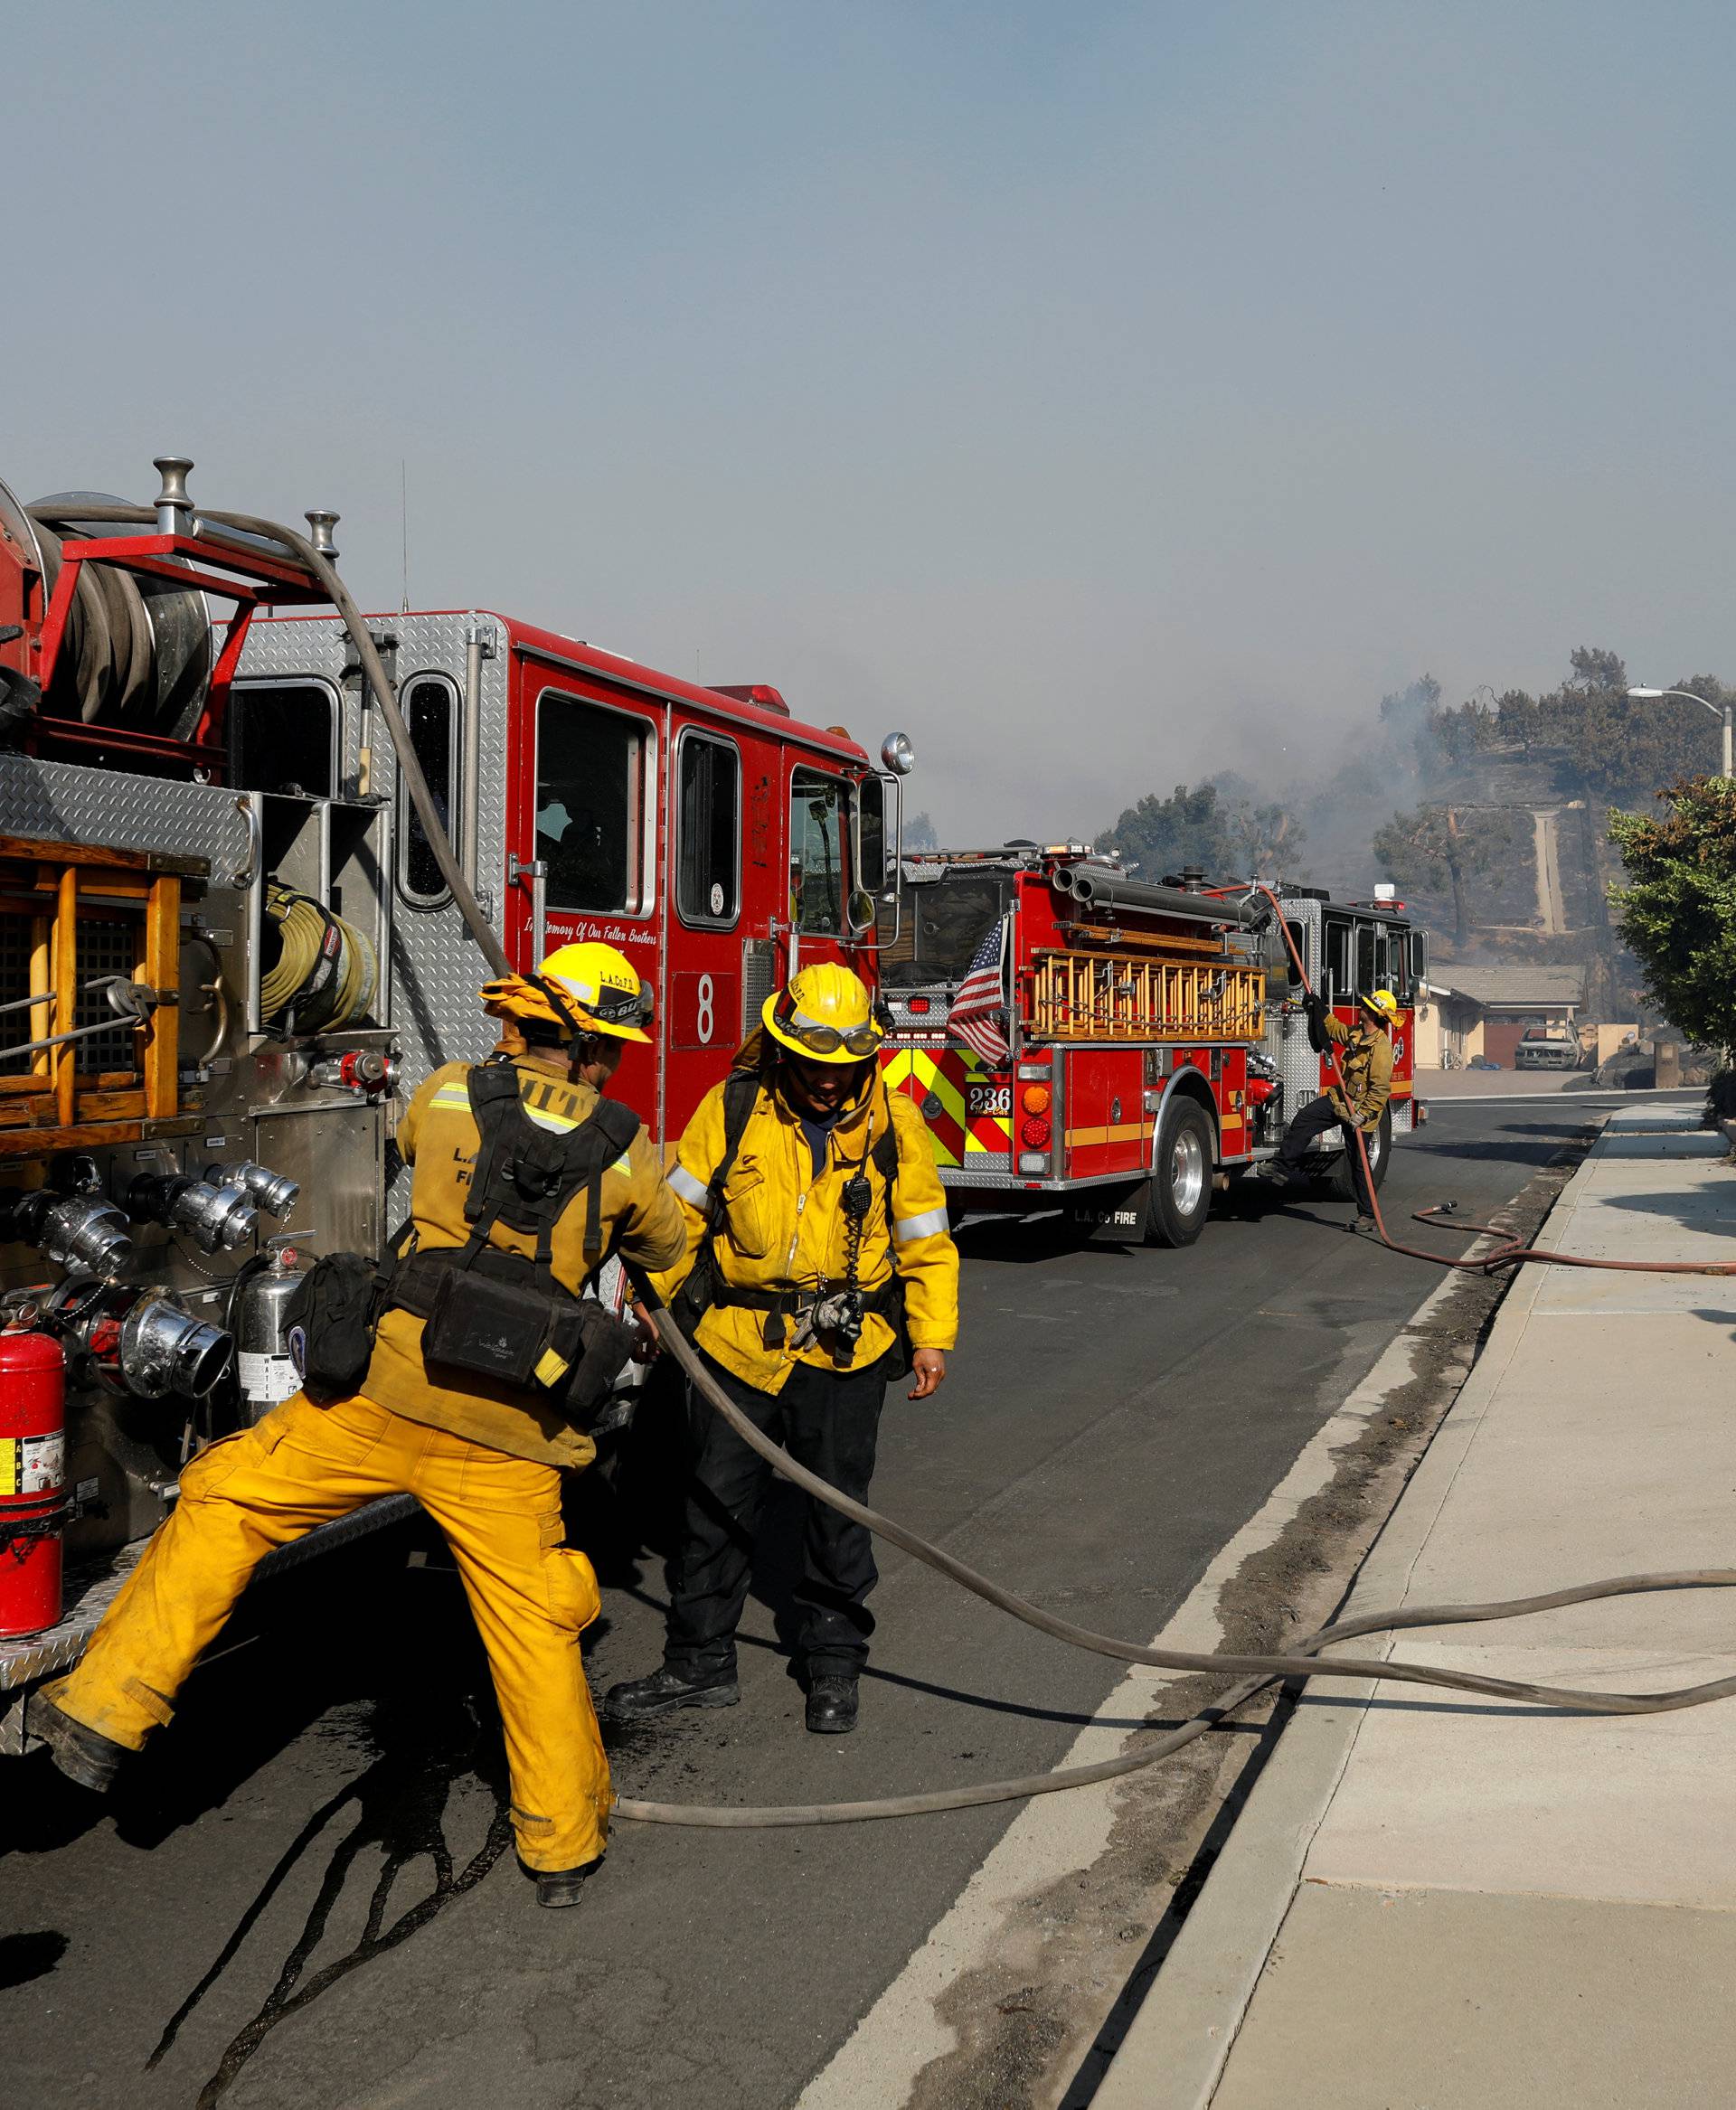 Firefighters from LA County assist during wildfire in Ventura, California